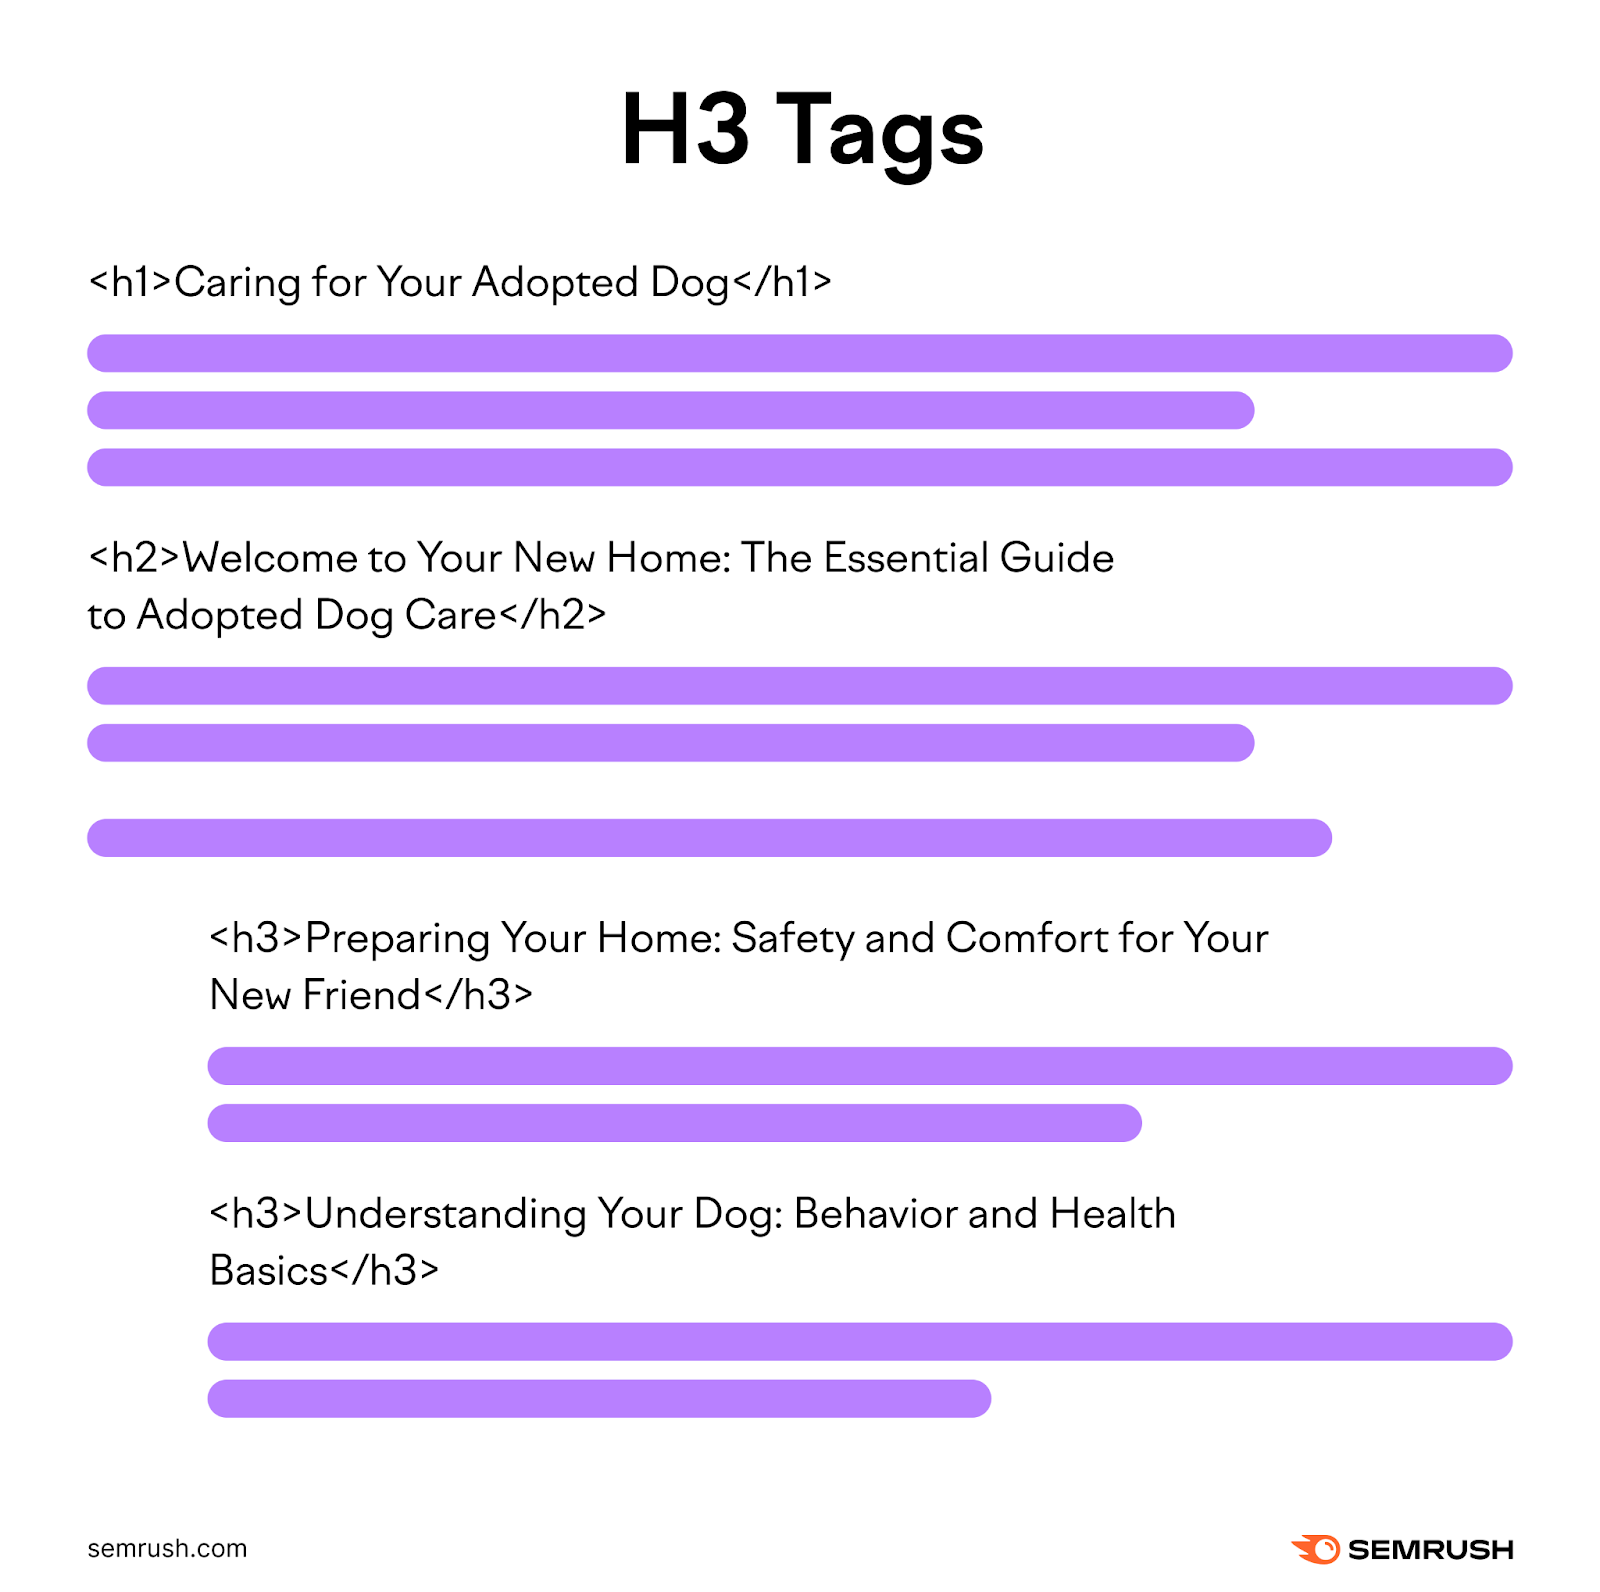 two h3 header tags added beneath the h2 about welcoming home your adopted dog. the h3 tags cover preparing your home and understanding dog behavior